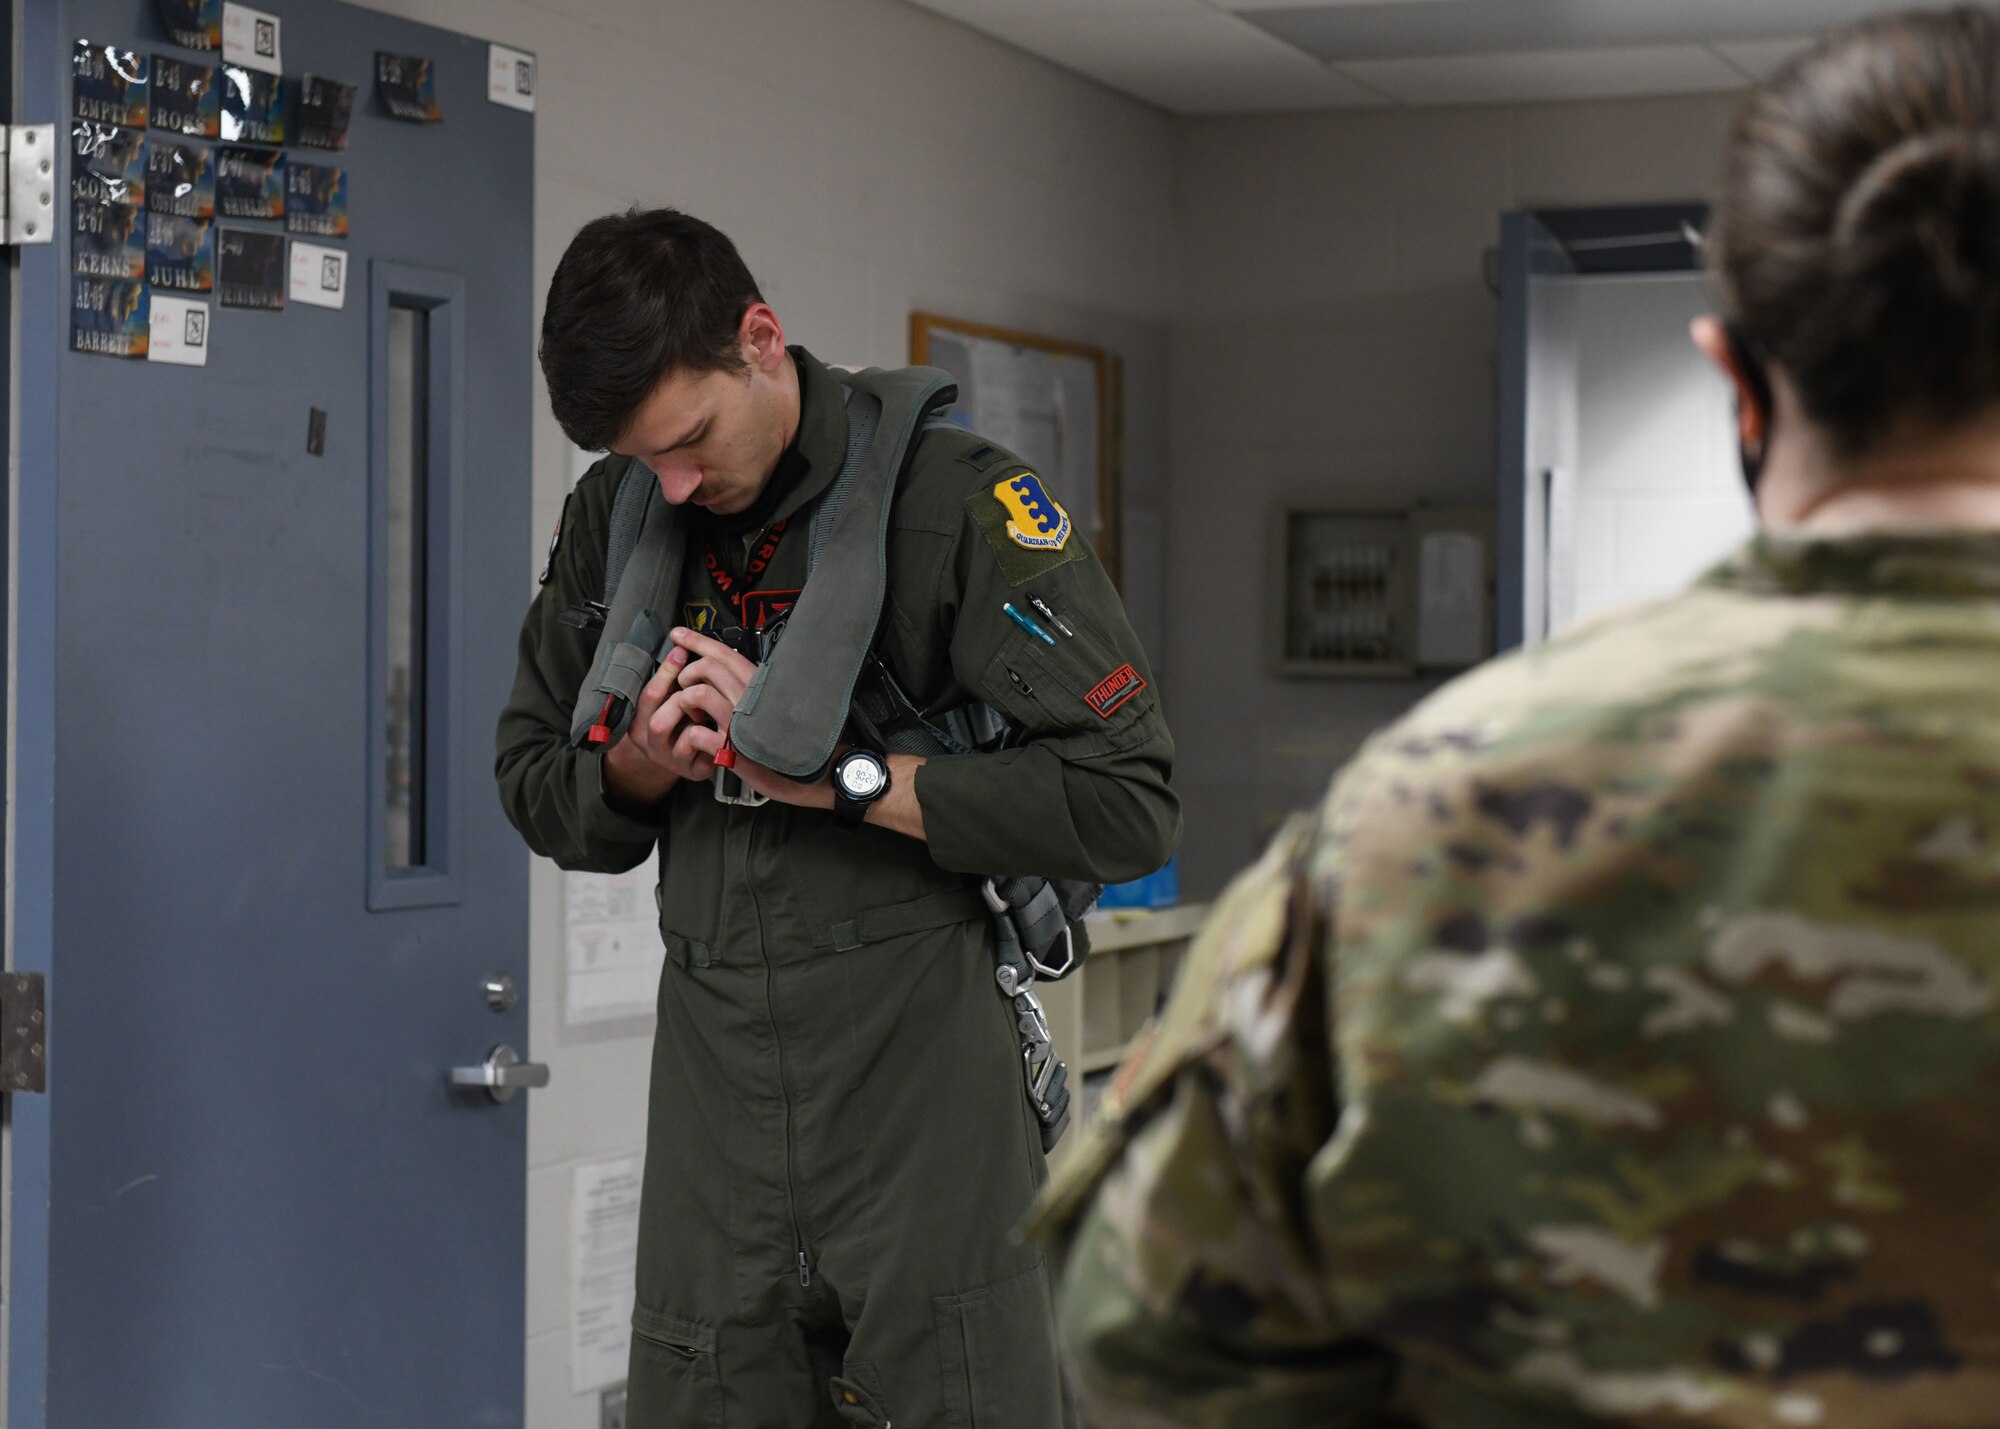 An aviator from the 34th Bomb Squadron prepares his flight equipment prior to a more than 25-hour non-stop mission from Ellsworth Air Force Base, S.D., May 4, 2020. Bomber Task Force deployments enhance the readiness and training necessary to respond to any contingency or challenge across the globe.  (U.S. Air Force photo by Airman 1st Class Christina Bennett)